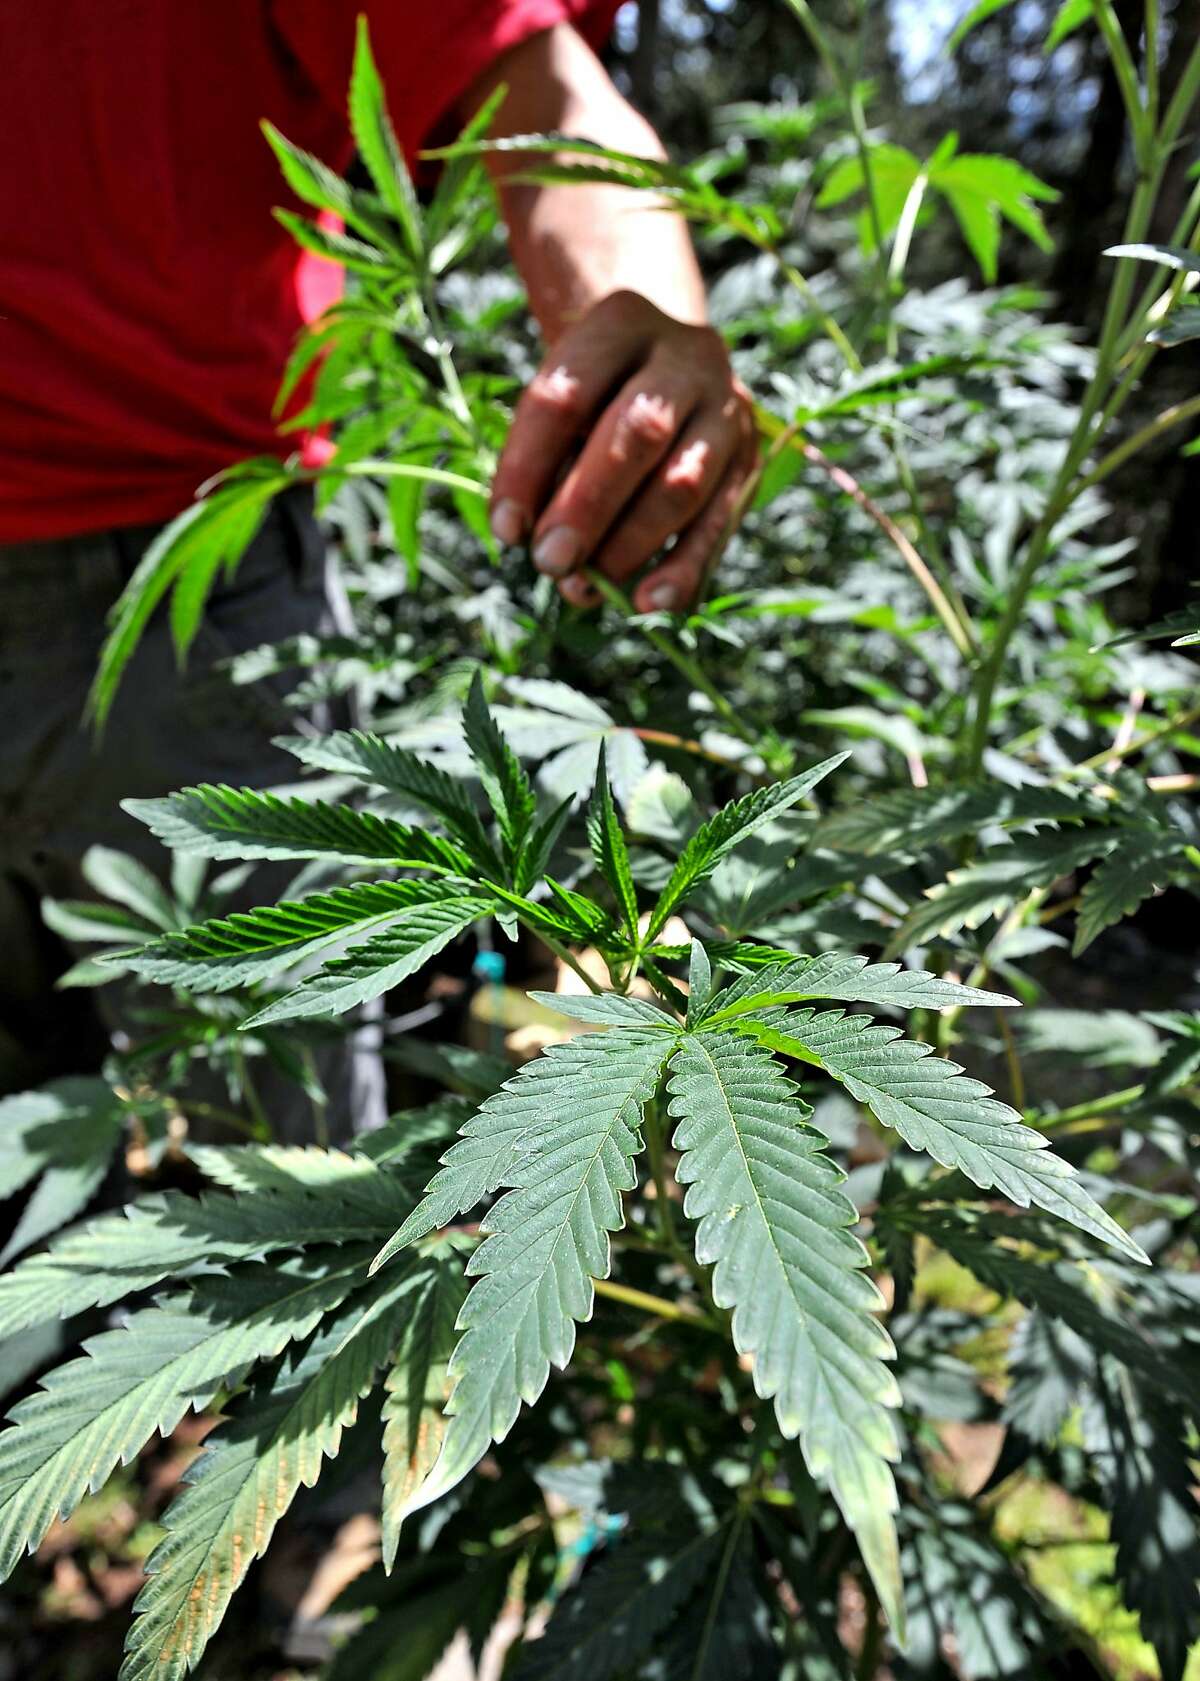 This May 11, 2016, photo shows marijuana plants at a home near the Green Springs, Ore. Only a handful of medical marijuana growers have applied for Jackson County permits to keep growing on rural residential land: even though growers without permits face fines of up to $10,000 and orders to remove their plants. (Jamie Lusch/The Medford Mail Tribune via AP) MANDATORY CREDIT